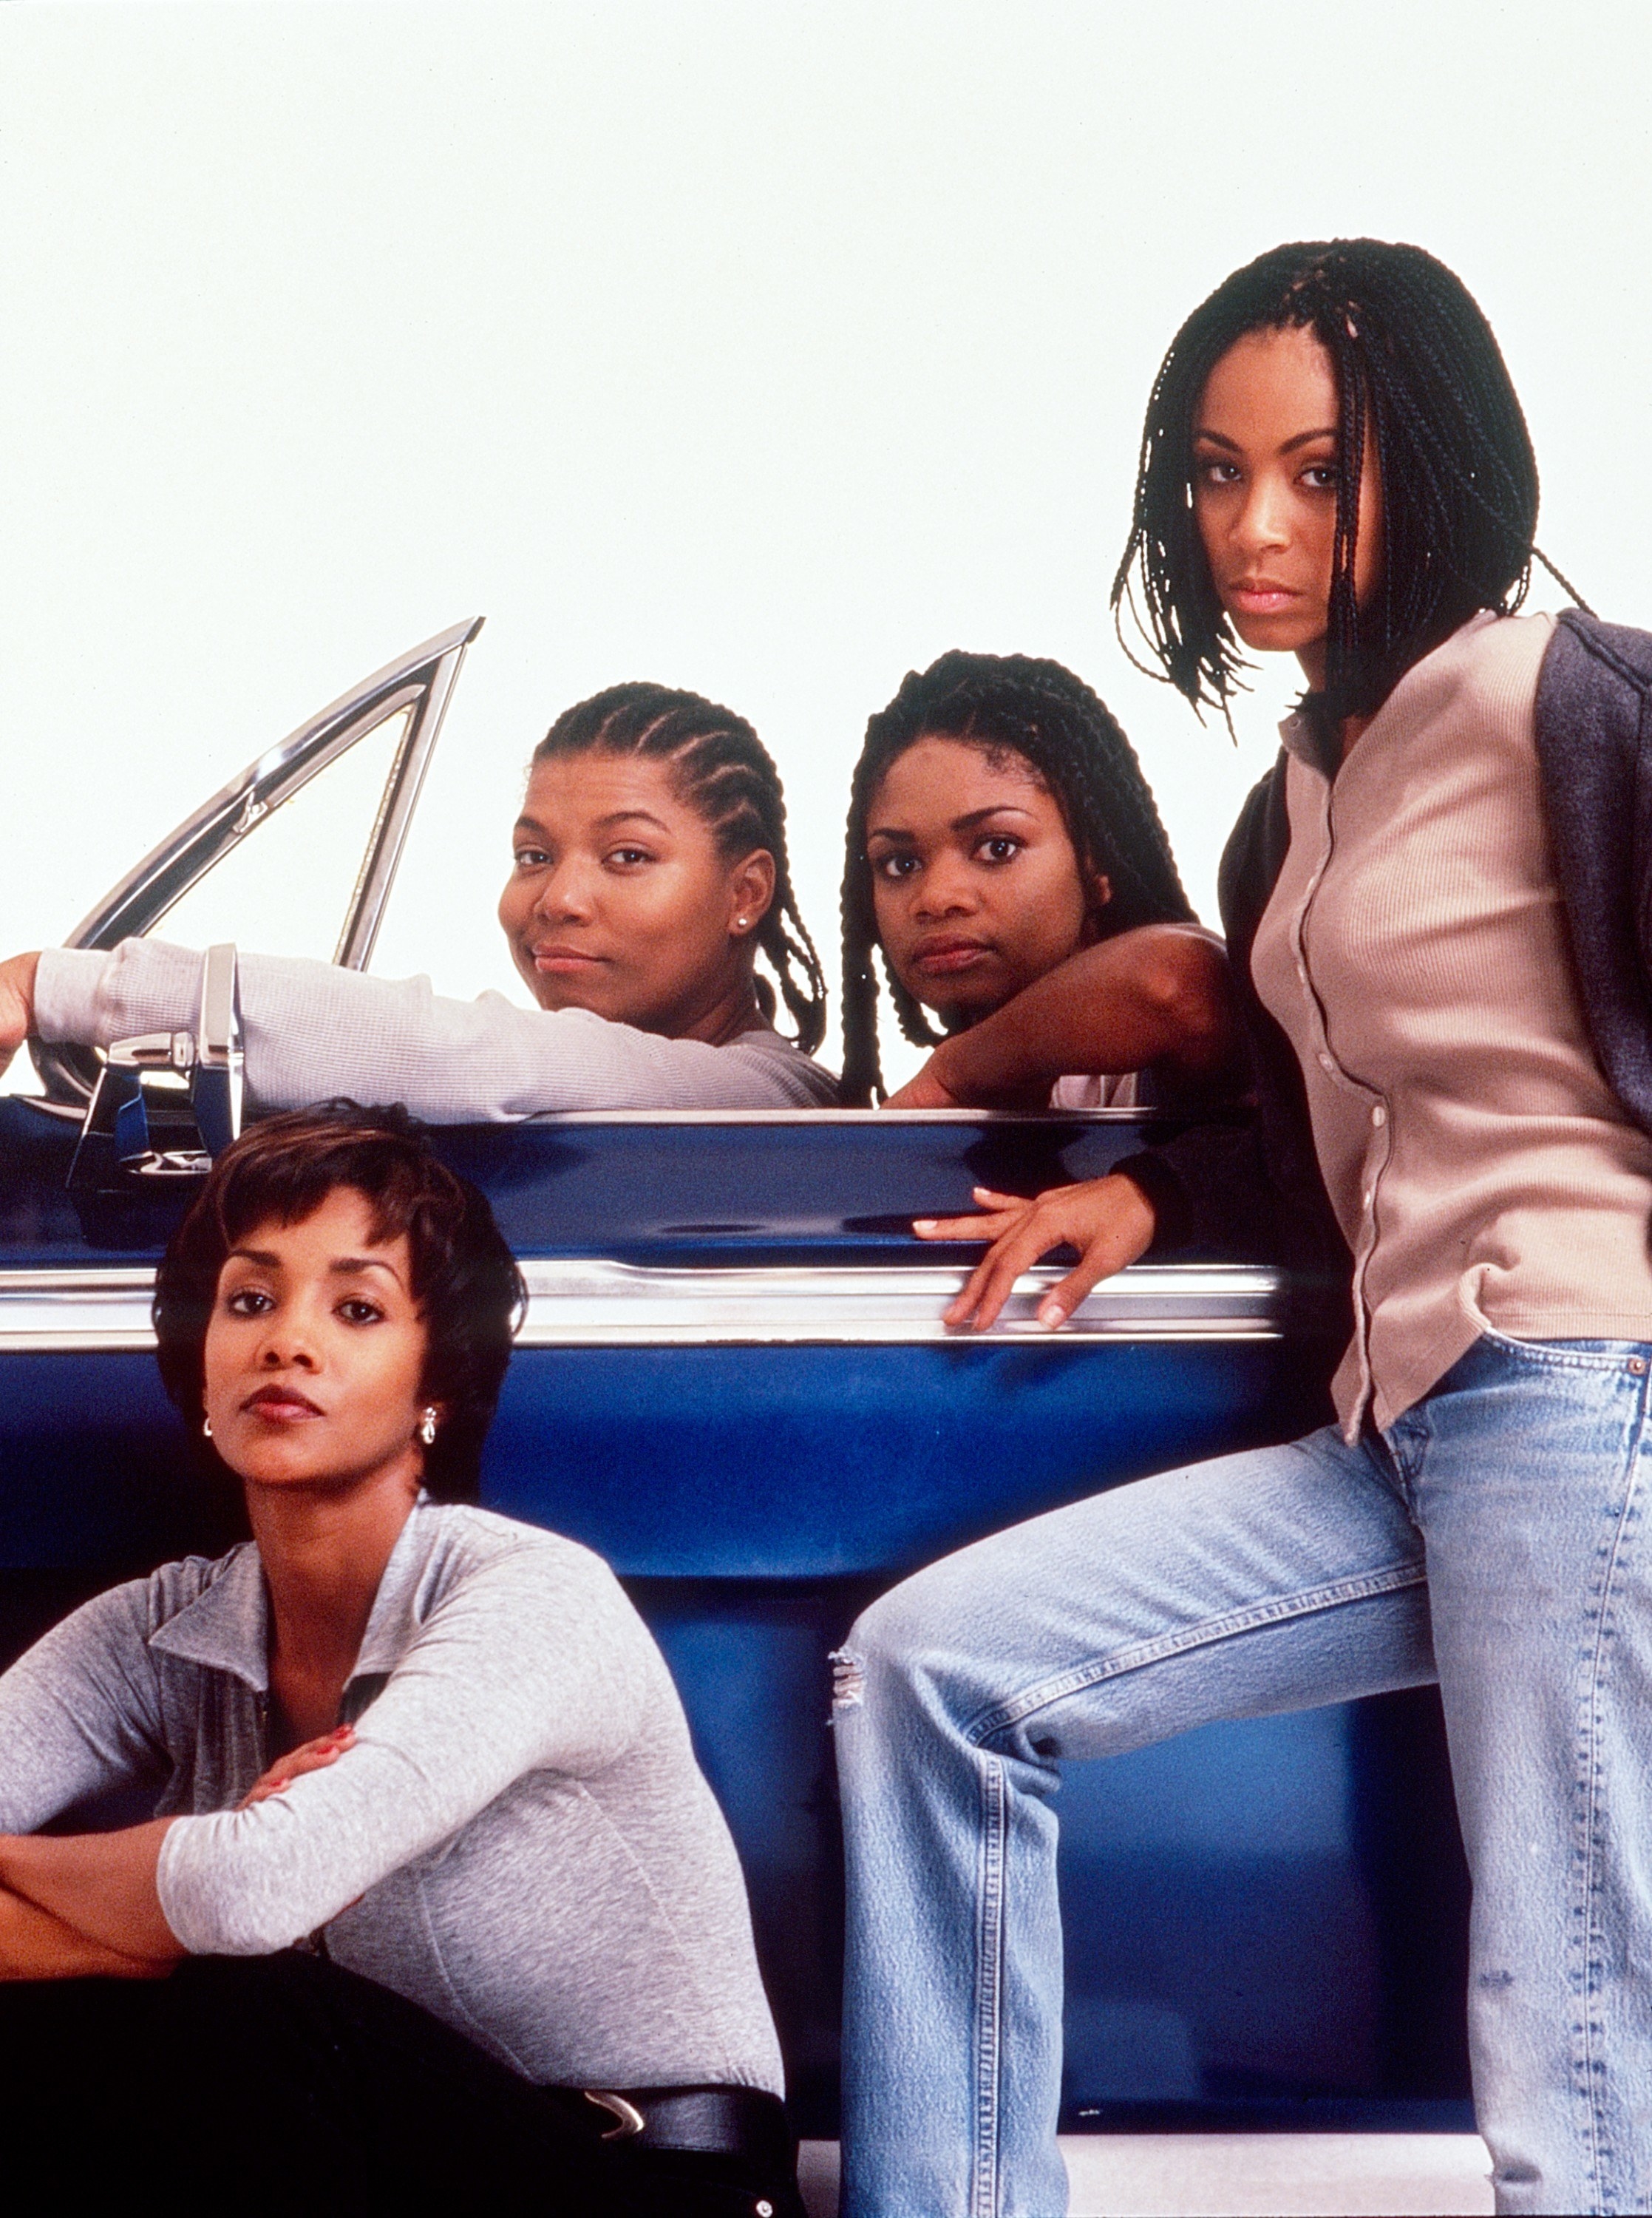 Vivica A. Fox, Queen Latifah, Kimberly Elise, and Jada Pinkett Smith posing in a car on the set of &quot;Set It Off&quot;